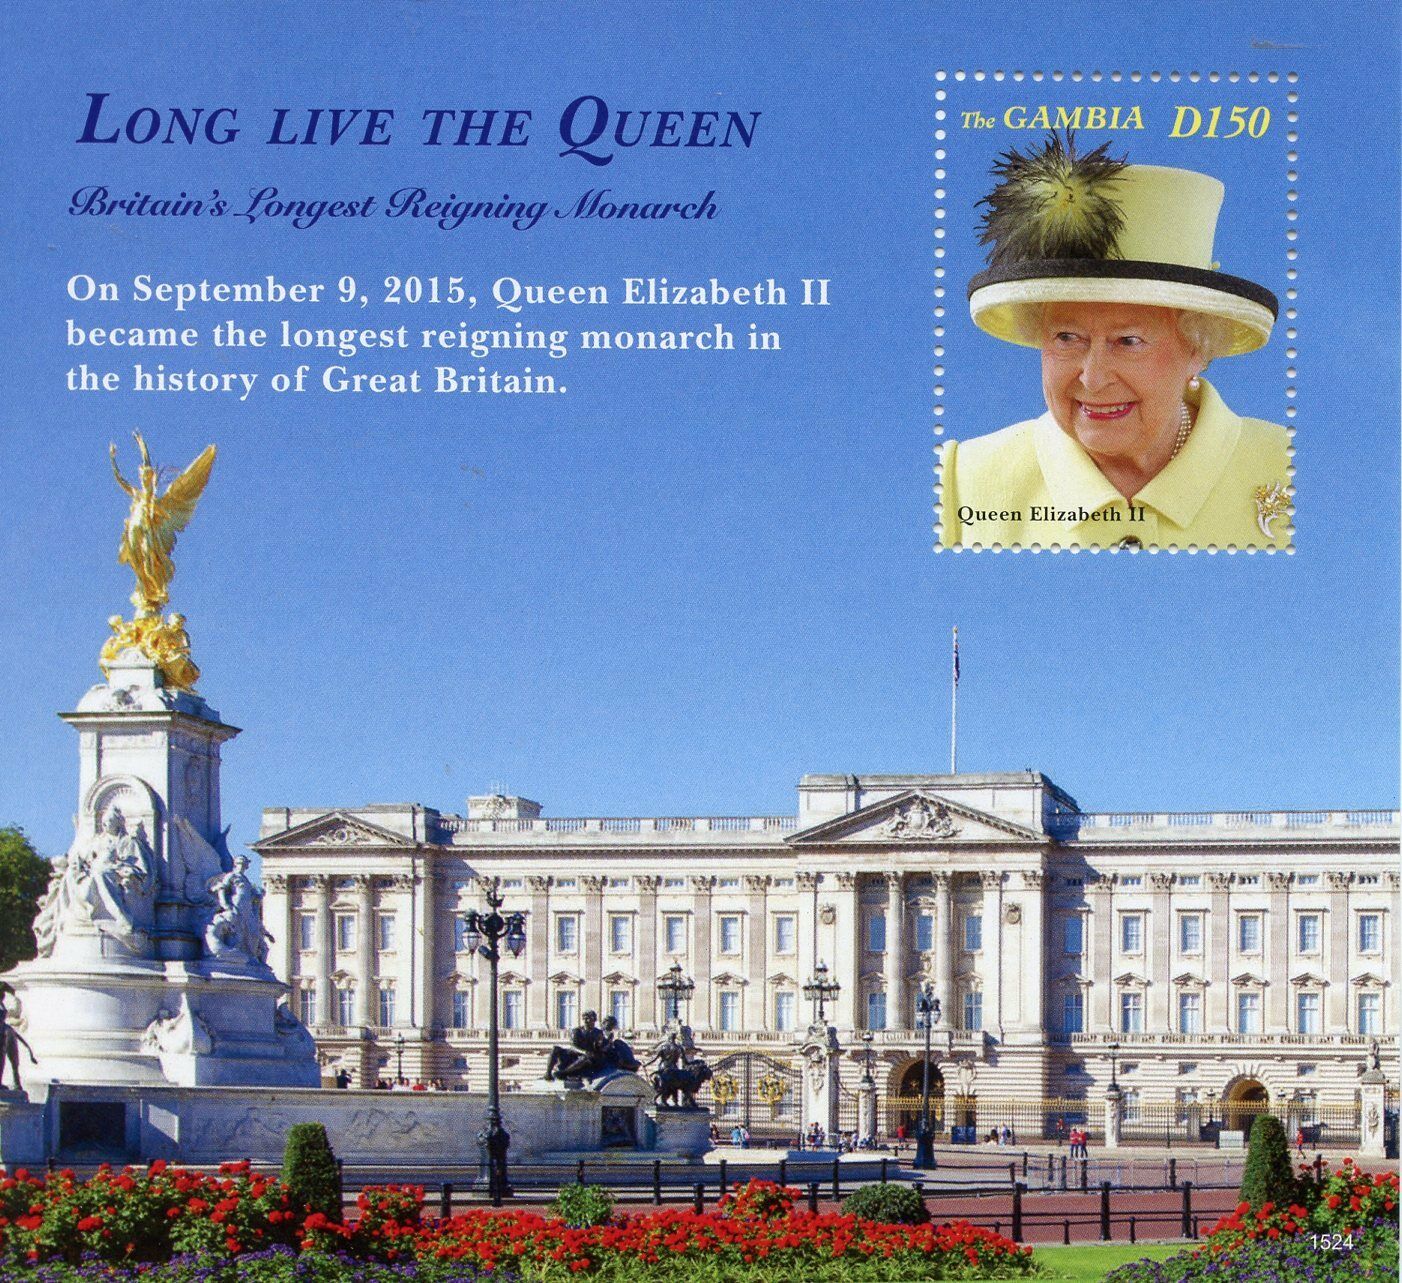 Gambia 2015 MNH Royalty Stamps Queen Elizabeth II Longest Reign Monarch 1v S/S